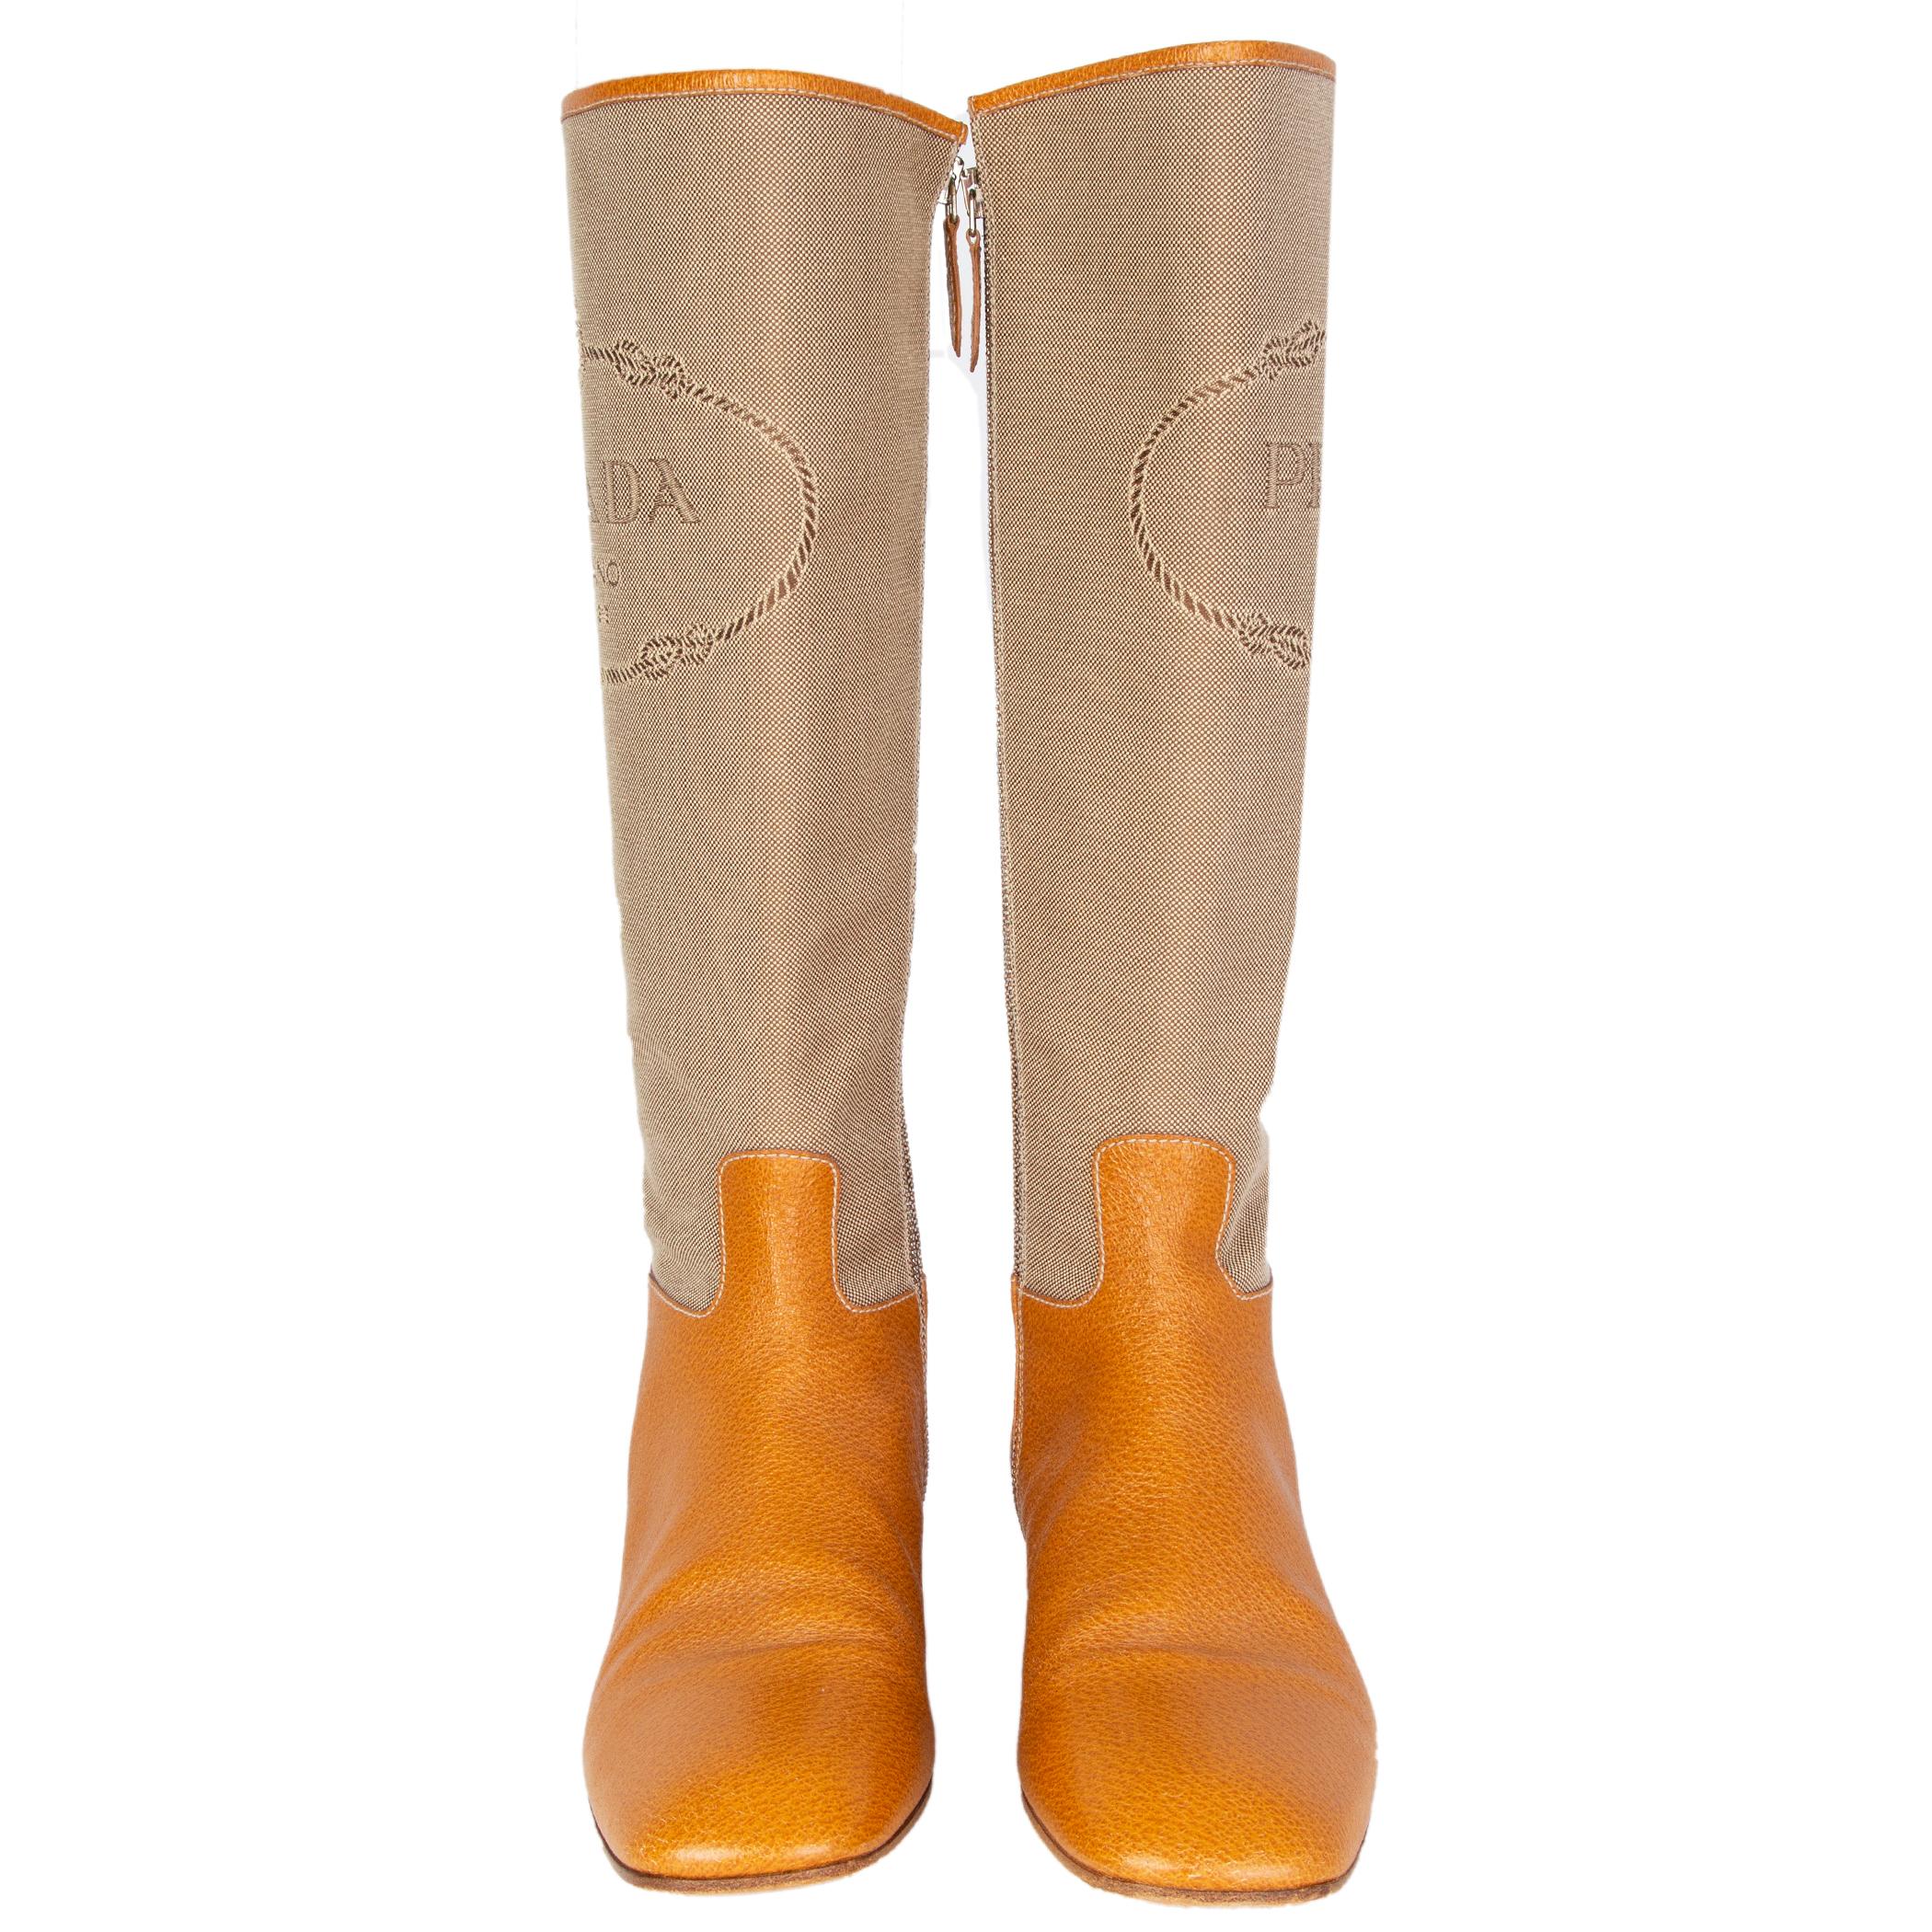 100% authentic Prada flat knee-high boots in cognac leather with beige Jacquard logo canvas shaft. Open with a zipper on the inside. Have been worn are in excellent condition. 

Measurements
Imprinted Size	40
Shoe Size	40
Inside Sole	27cm